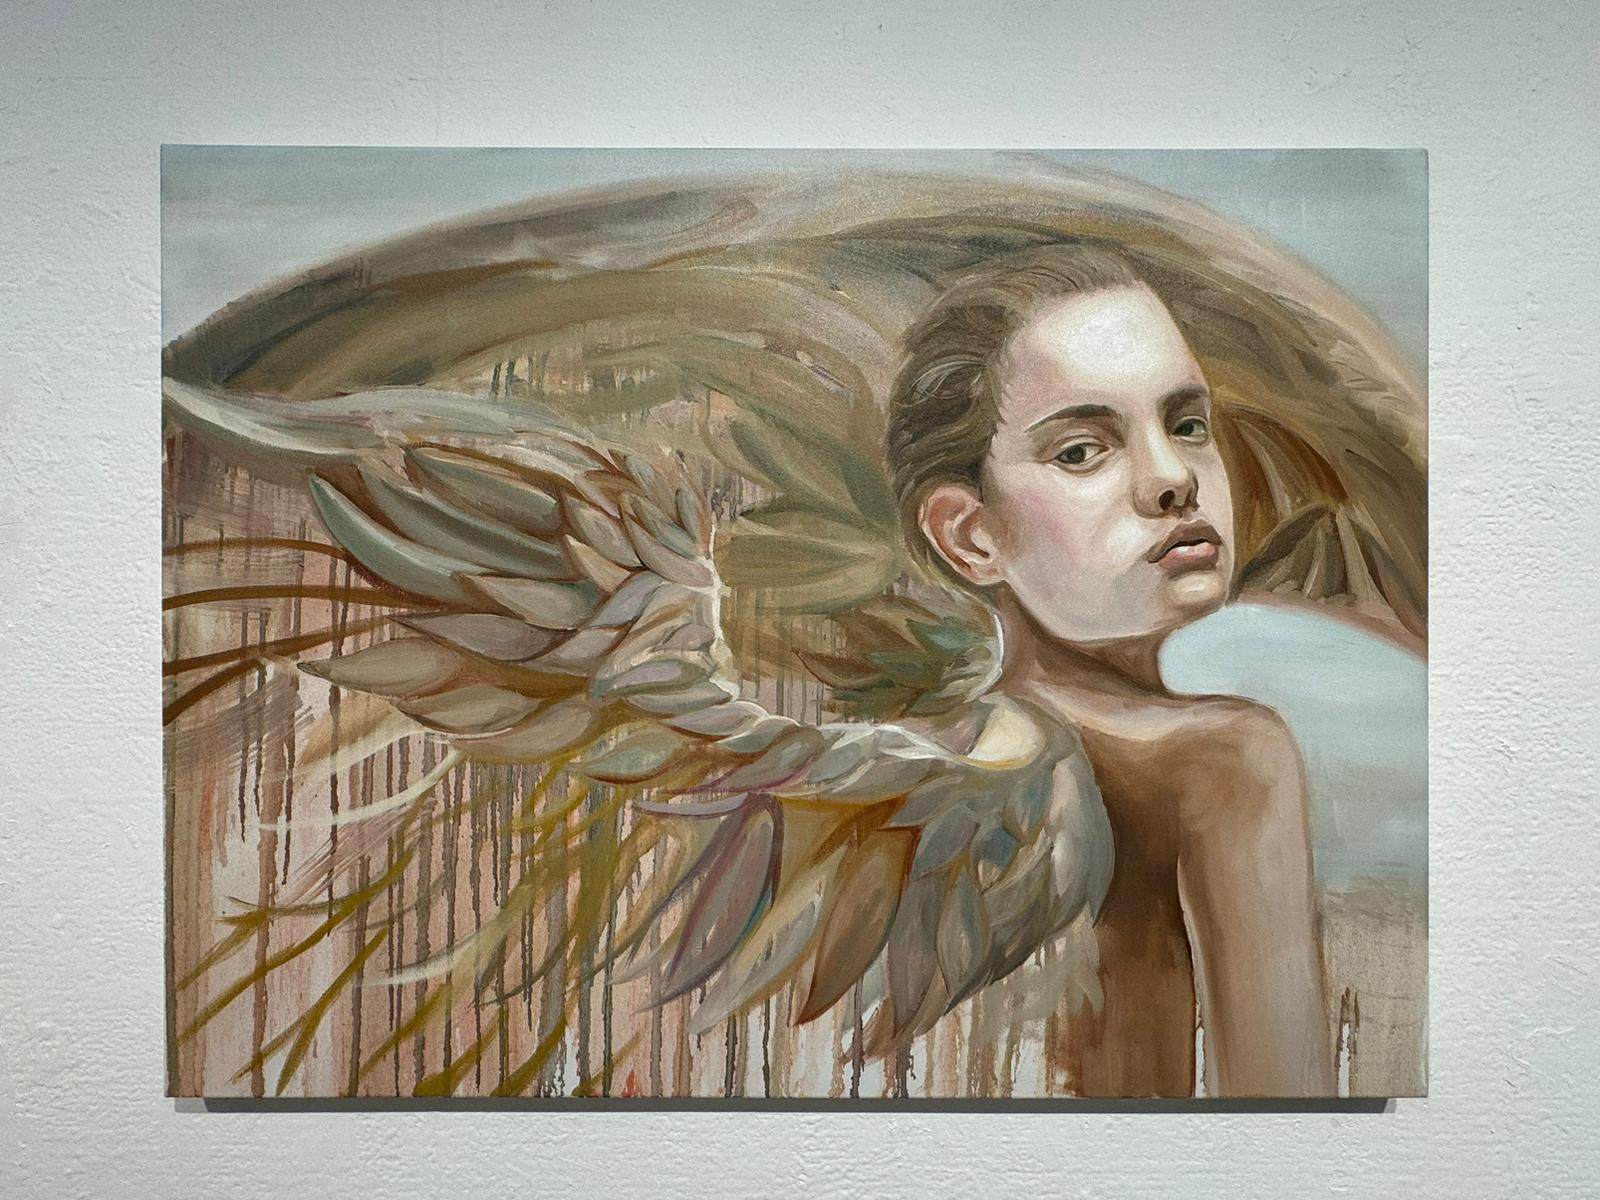 Claire Lee’s painting “Naked Heart” depicts Russian model and NGO founder Natalia Vodianova. Photo: Handout